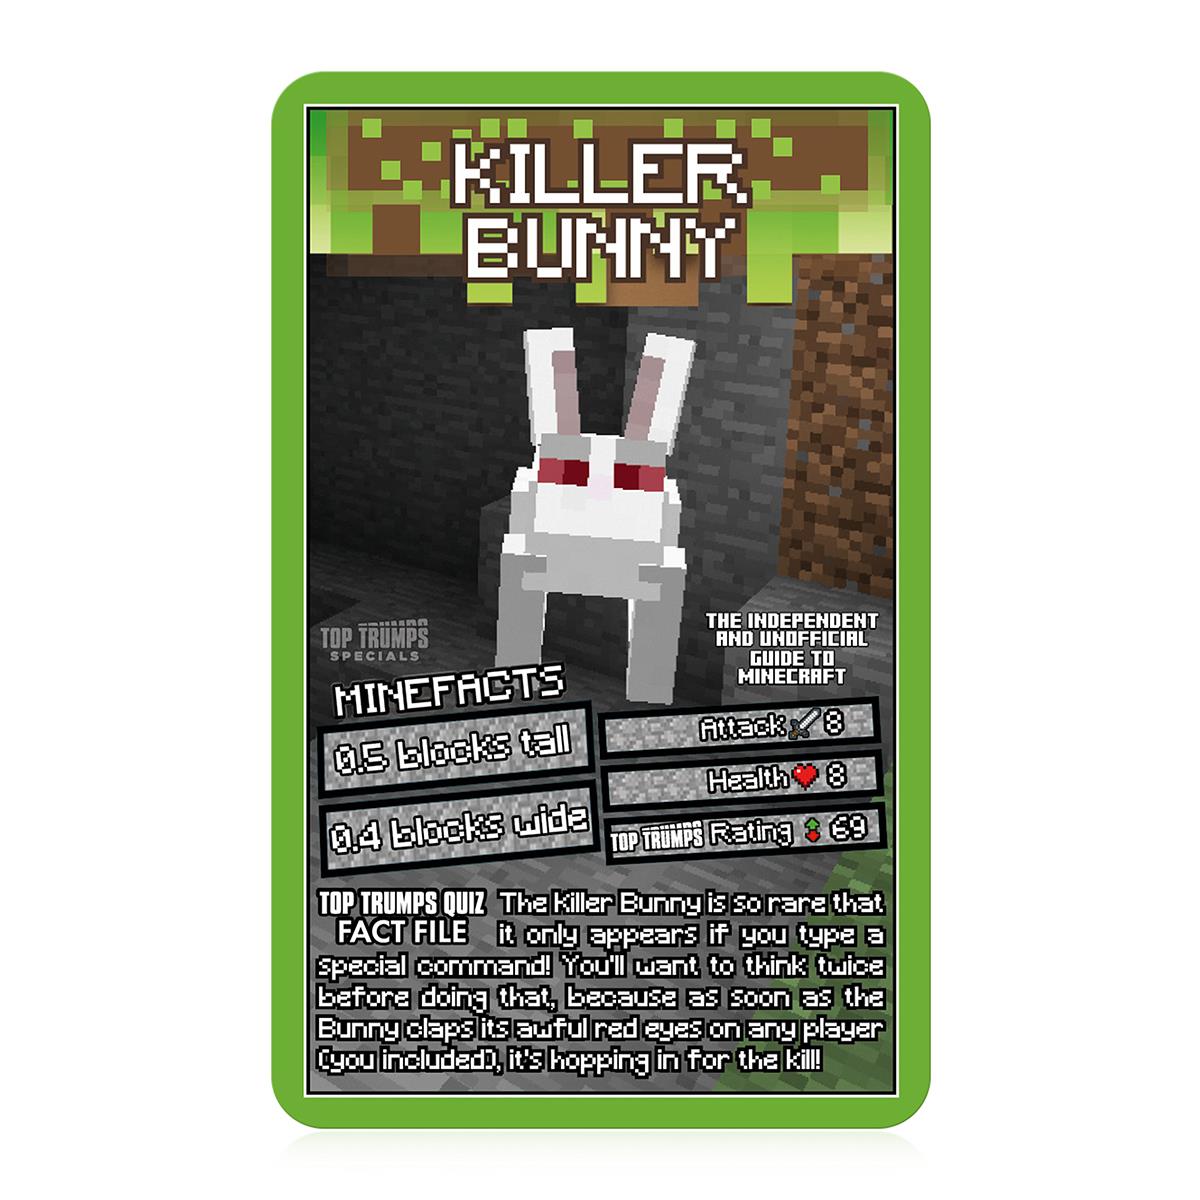 The Independent & Unofficial Guide to Minecraft Top Trumps Card Game